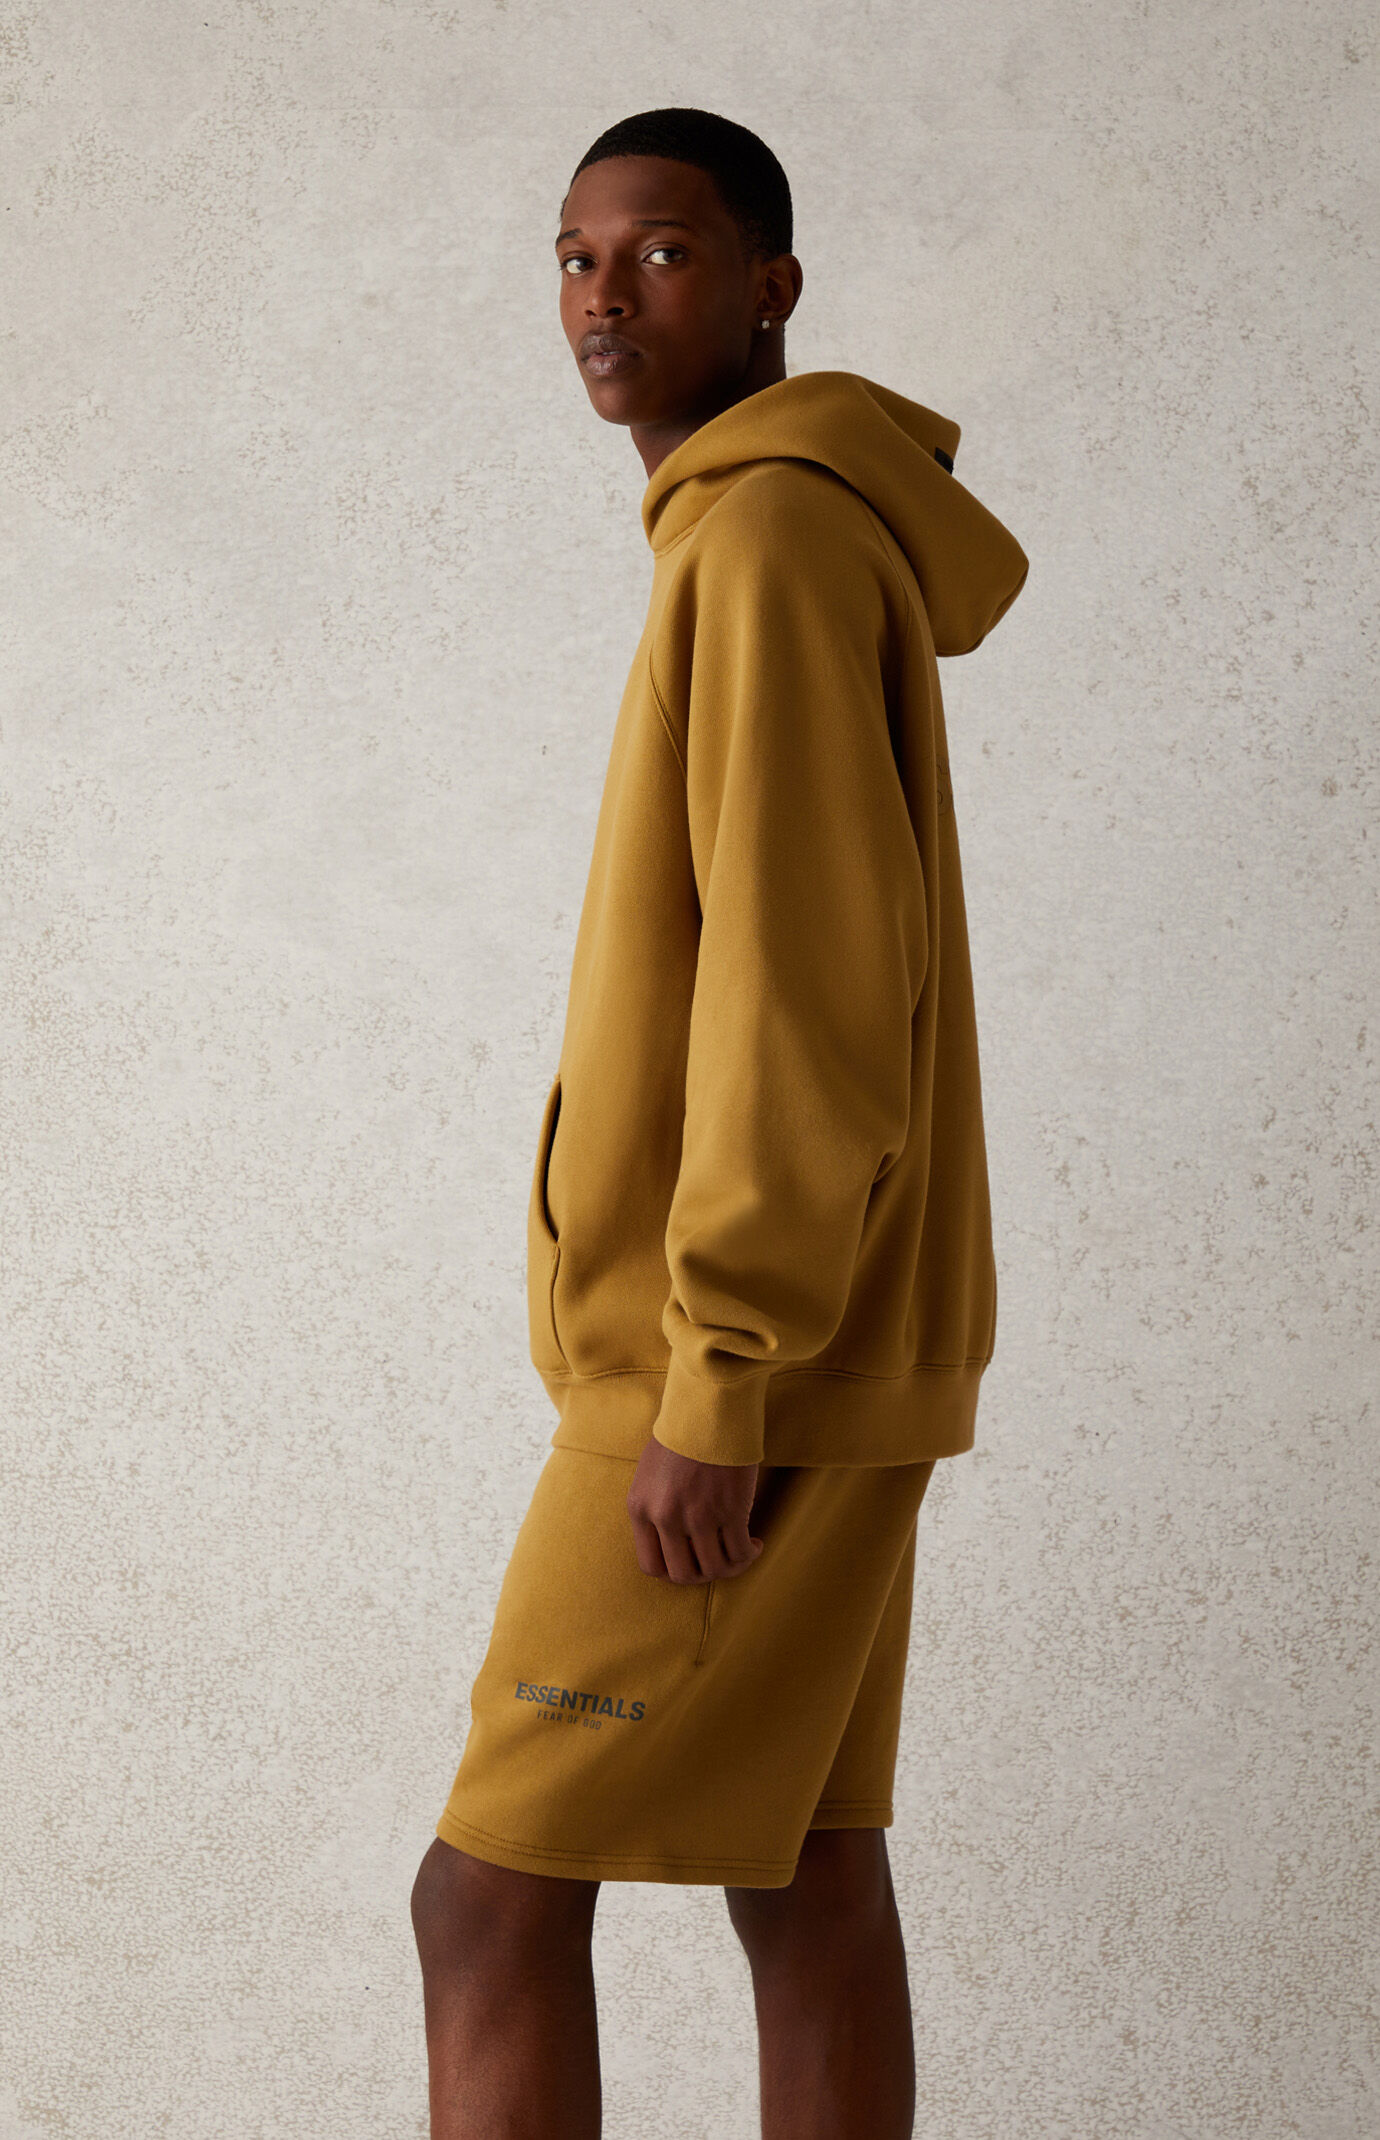 Essentials Fear Of God Amber Hoodie | PacSun